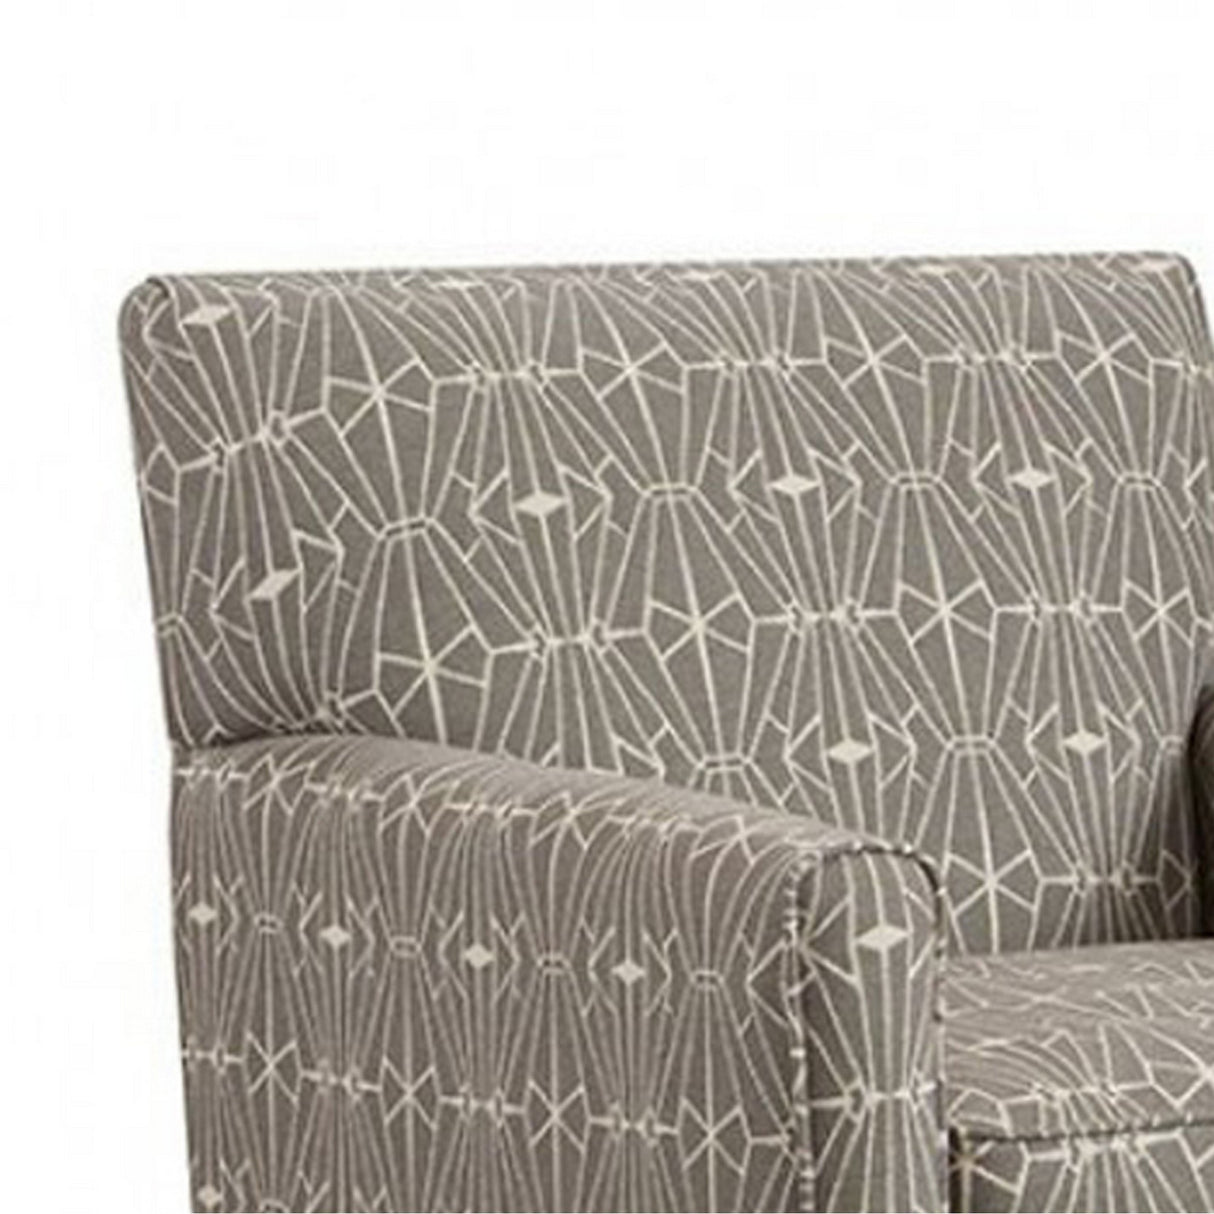 32 Inch Contemporary Accent Arm Chair, Geometric Fabric Pattern, Gray - Home Elegance USA